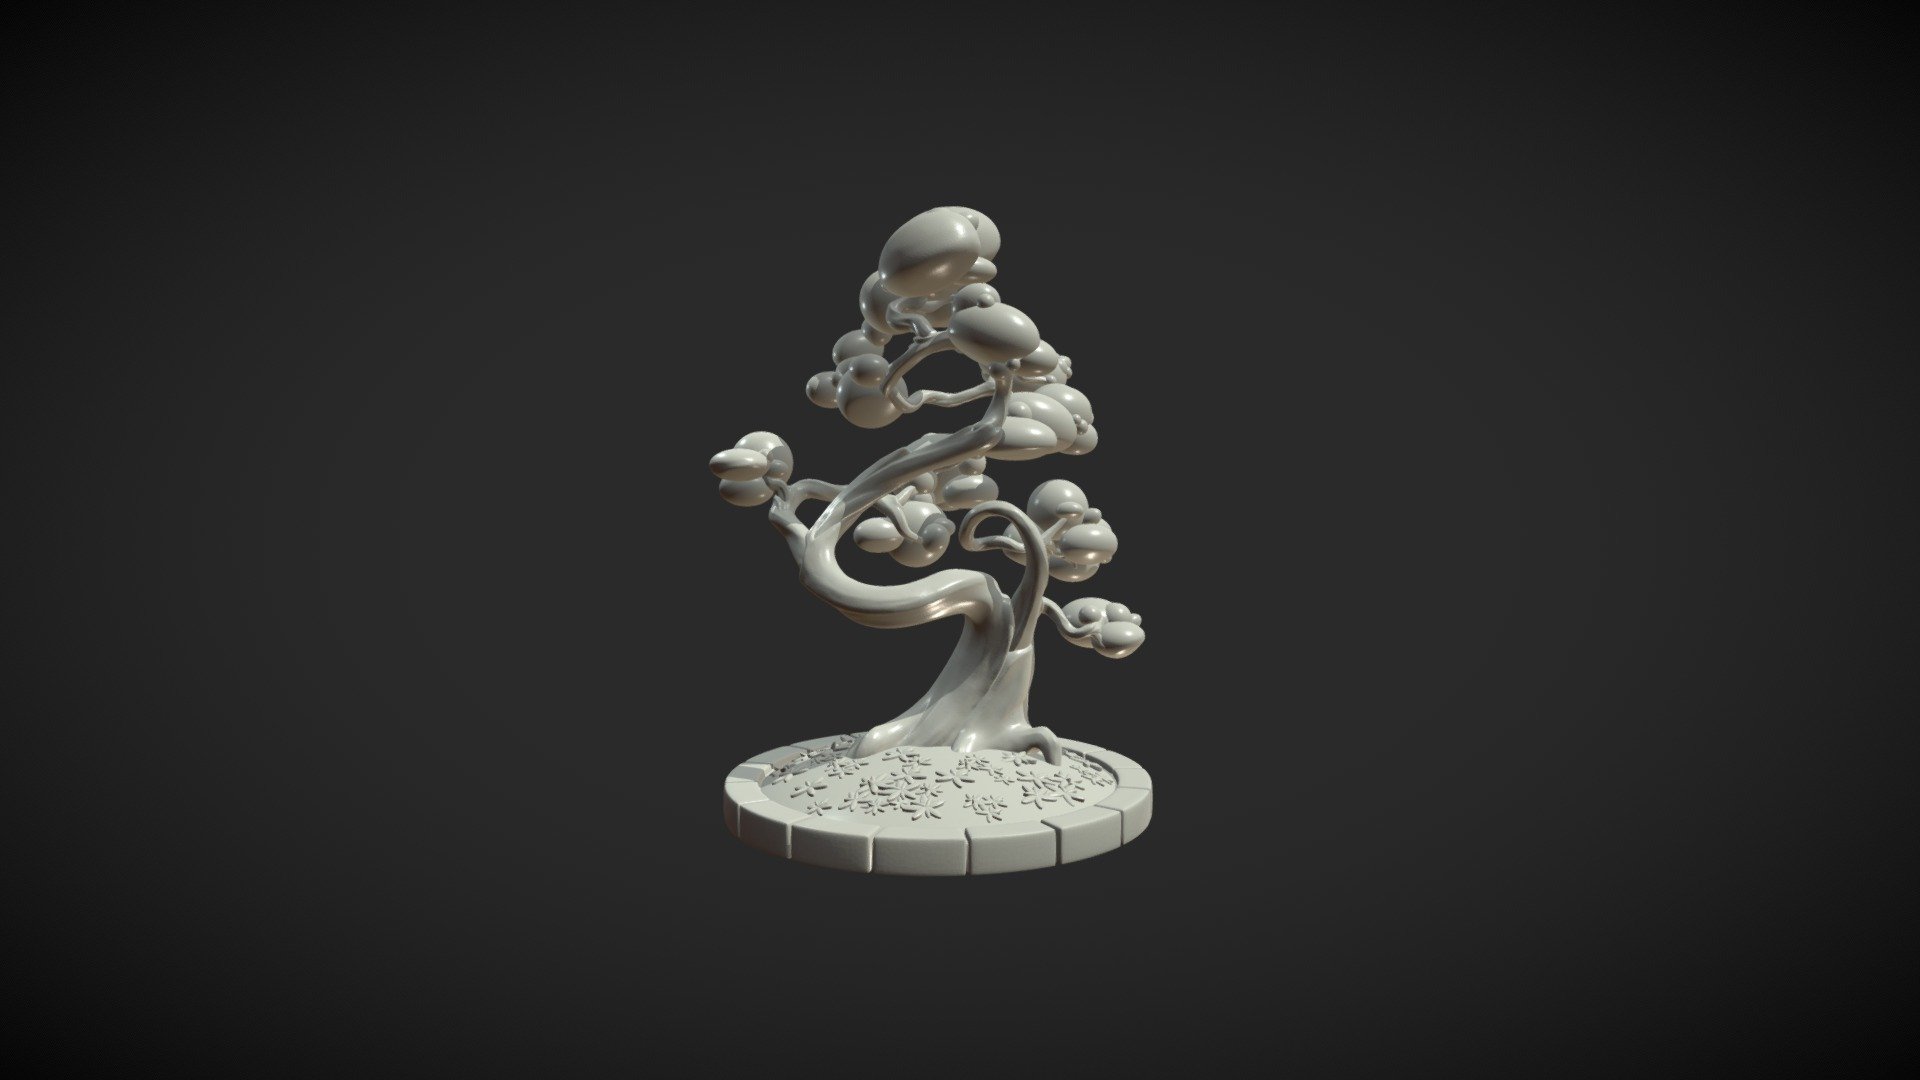 Print ready Tree.

Mesh is manifold. 
Measure units are millimeters, it is about 5.8 cm in height.

Faces count: 690766 (tris)

Here is three version of the model:

1) Ftree-Solid.blend (.obj, .stl, .fbx, .dae)

2) Ftree-Solid-dry.blend (.obj, .stl, .fbx, .dae) The tree without foliage.

3) Ftree-Parts.blend (.obj, .stl, .fbx, .dae) Contains separate parts before bolean operations.

Available formats: .blend, .obj, .stl, .fbx, .dae

======================================================== 

Cycles materials that was used for rendering is available in .blend files 3d model